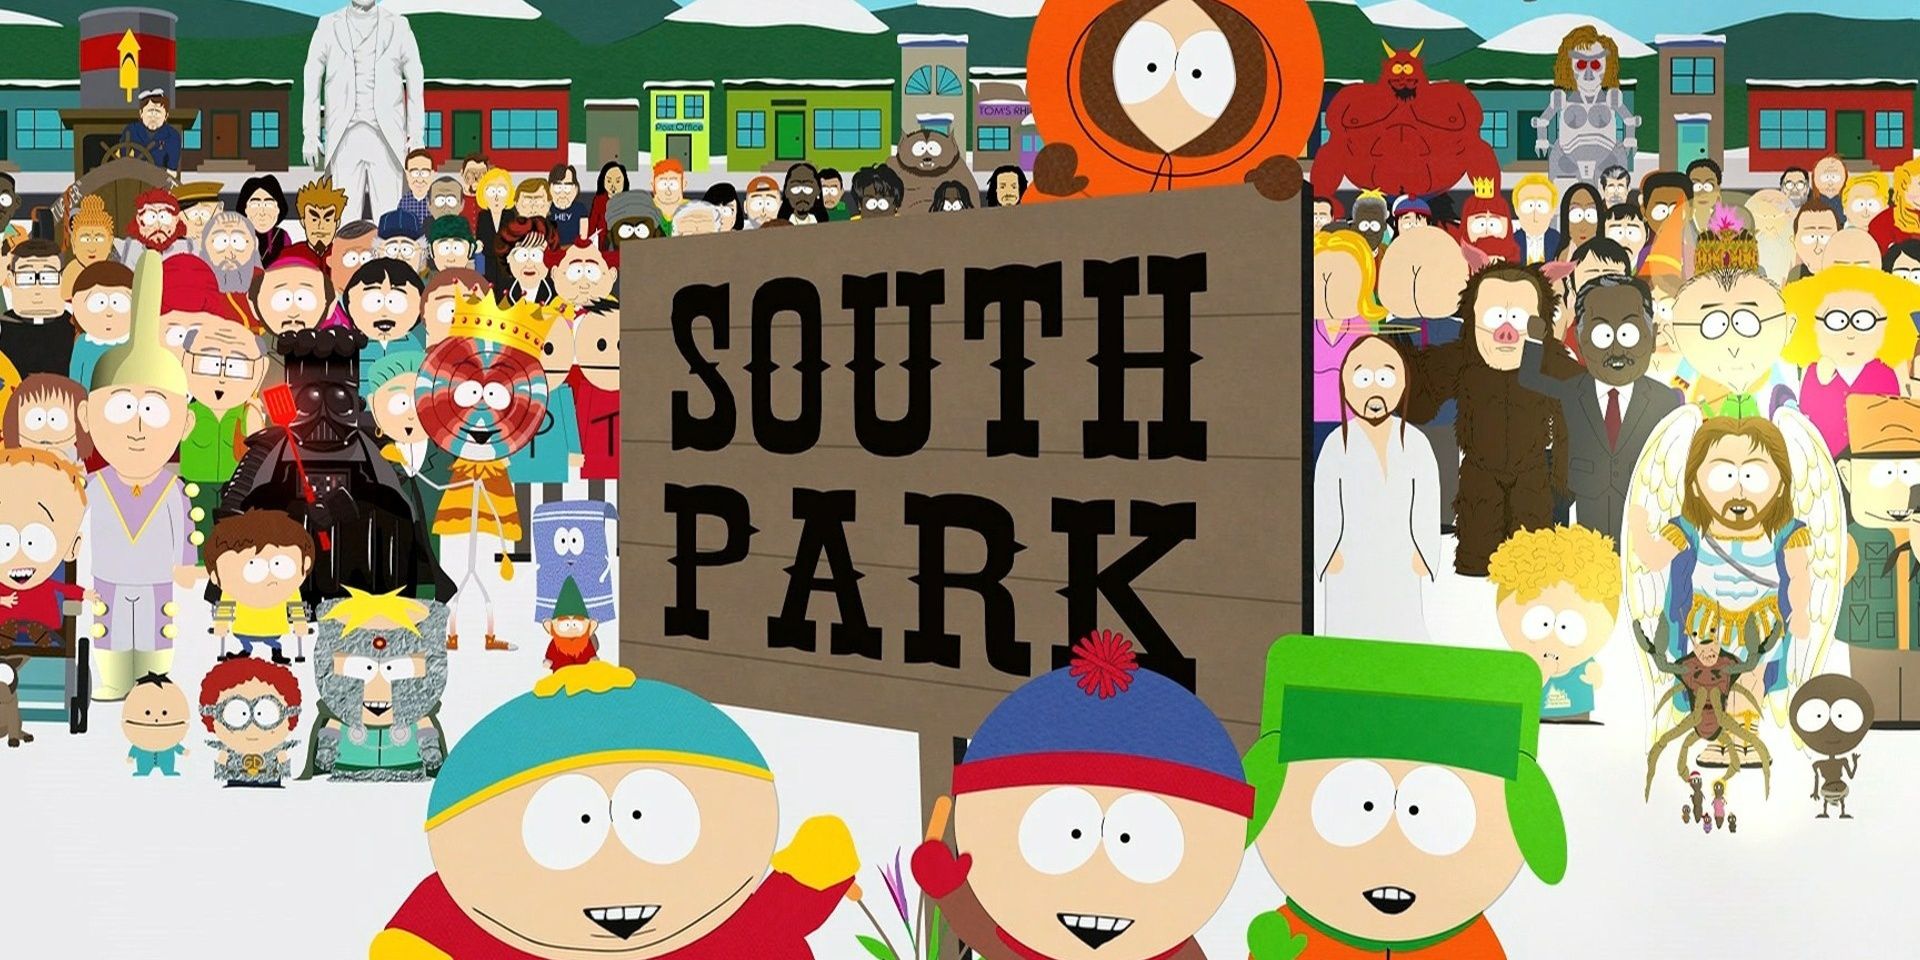 South Park cast standing around the South Park sign